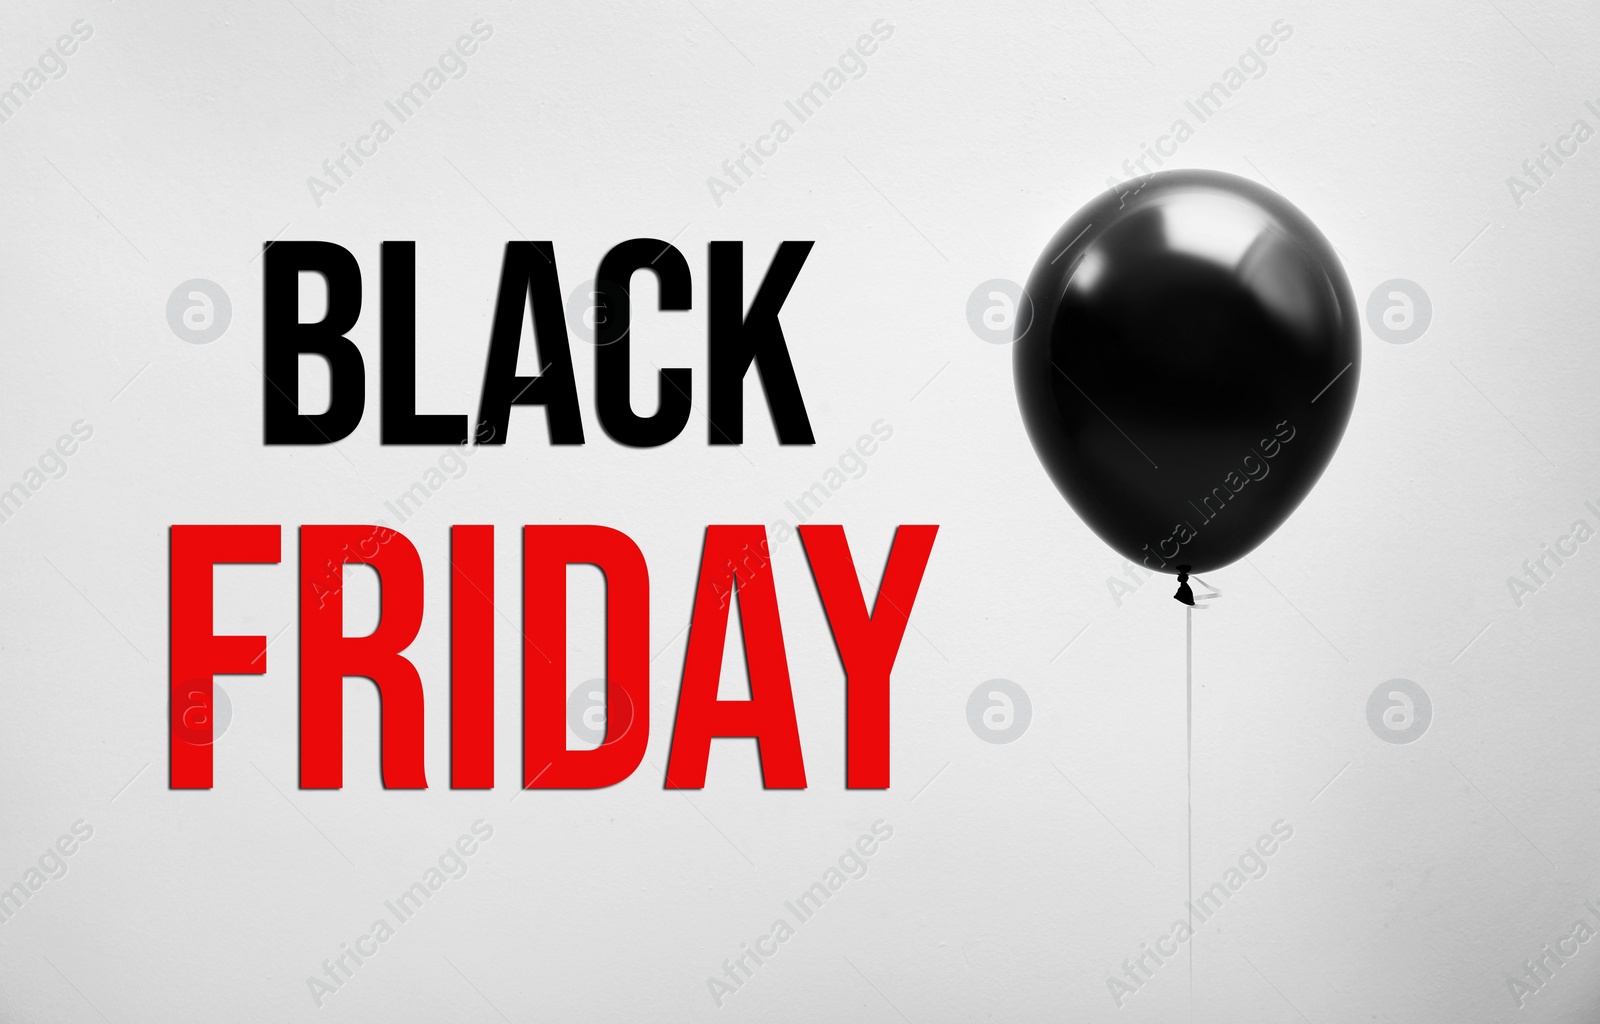 Image of Text BLACK FRIDAY and big balloon on light background